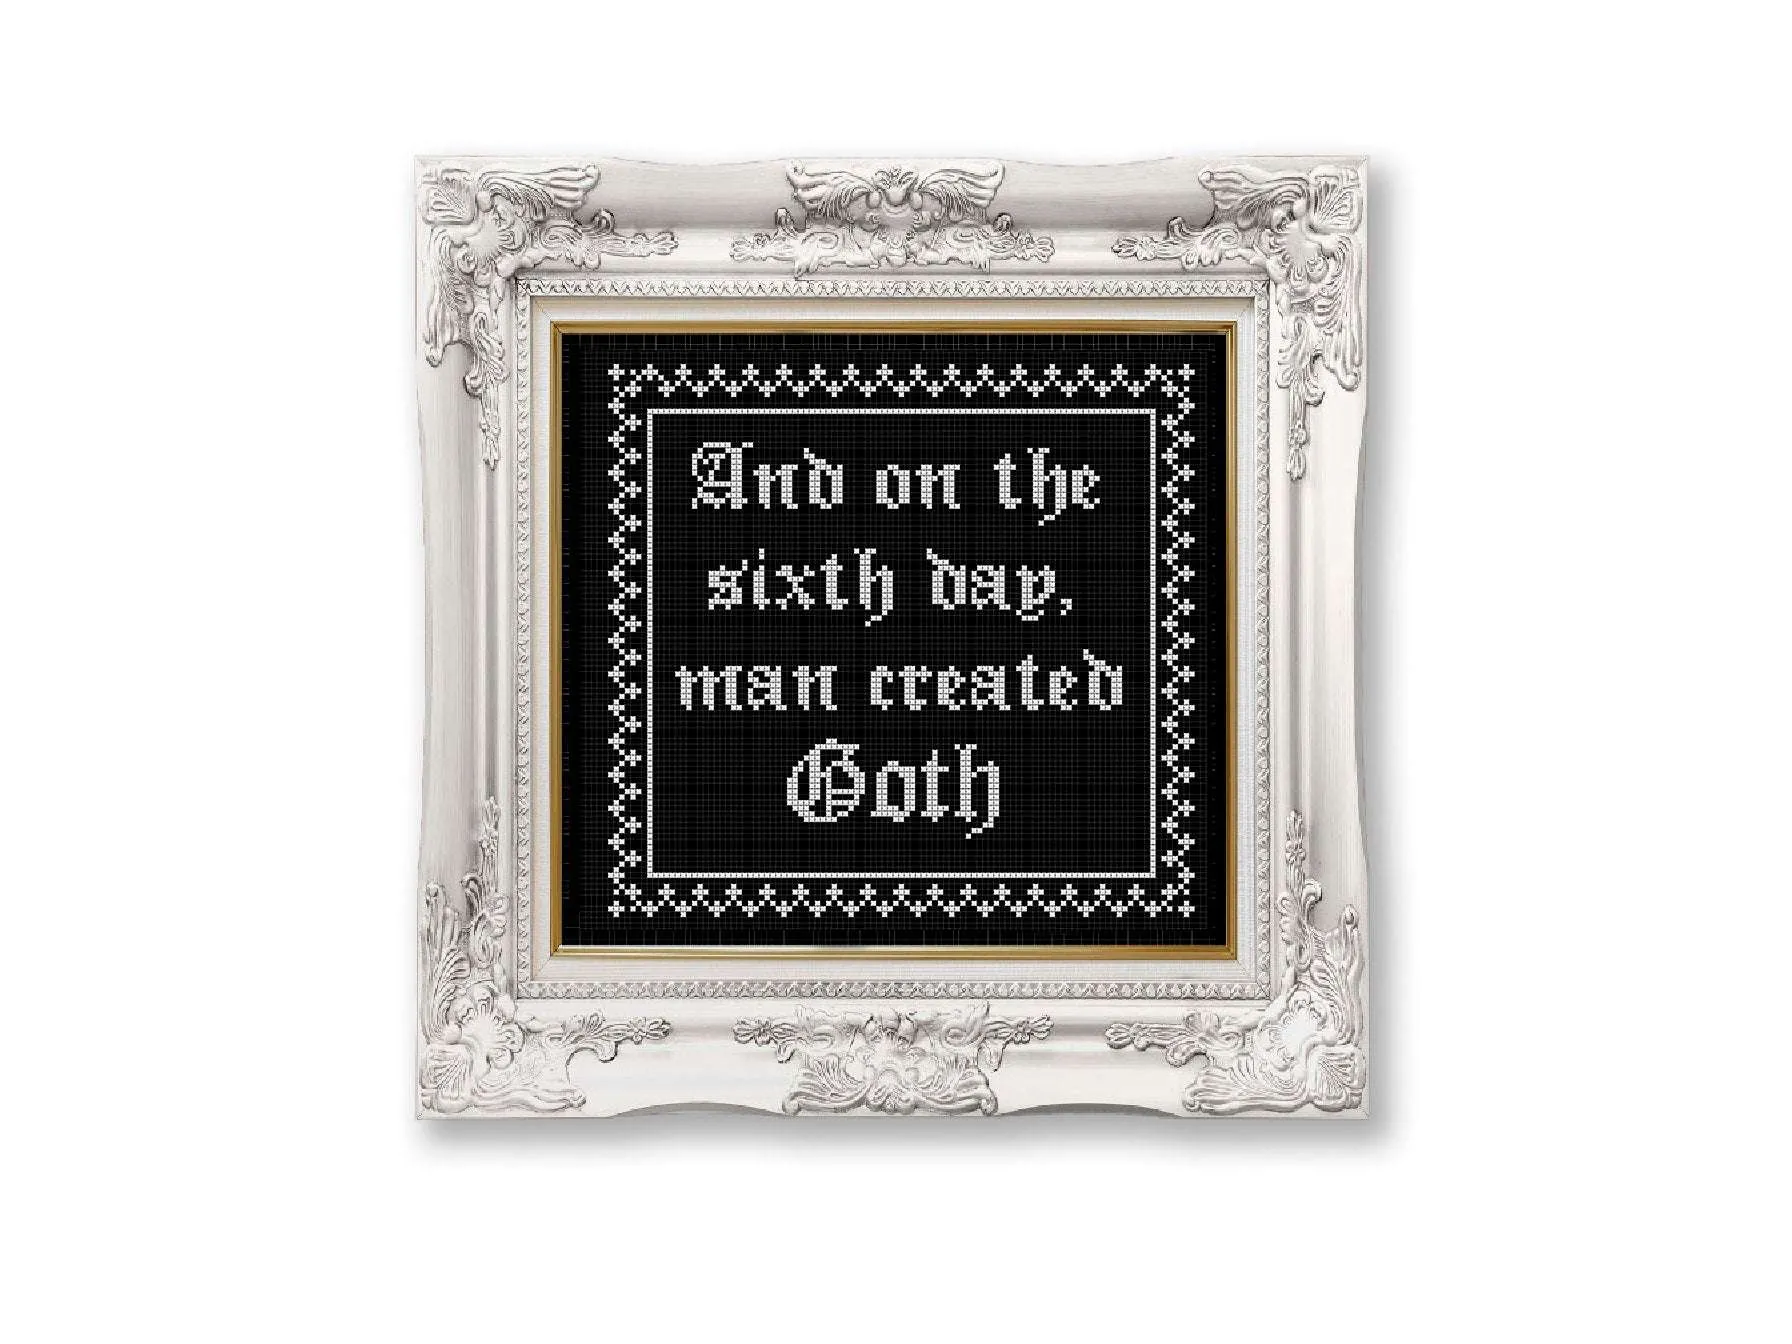 Cross stitch pattern with the text AND ON THE SIXTH DAY MAN CREATED GOTH. Stitched onto black aida fabric using white embroidery thread